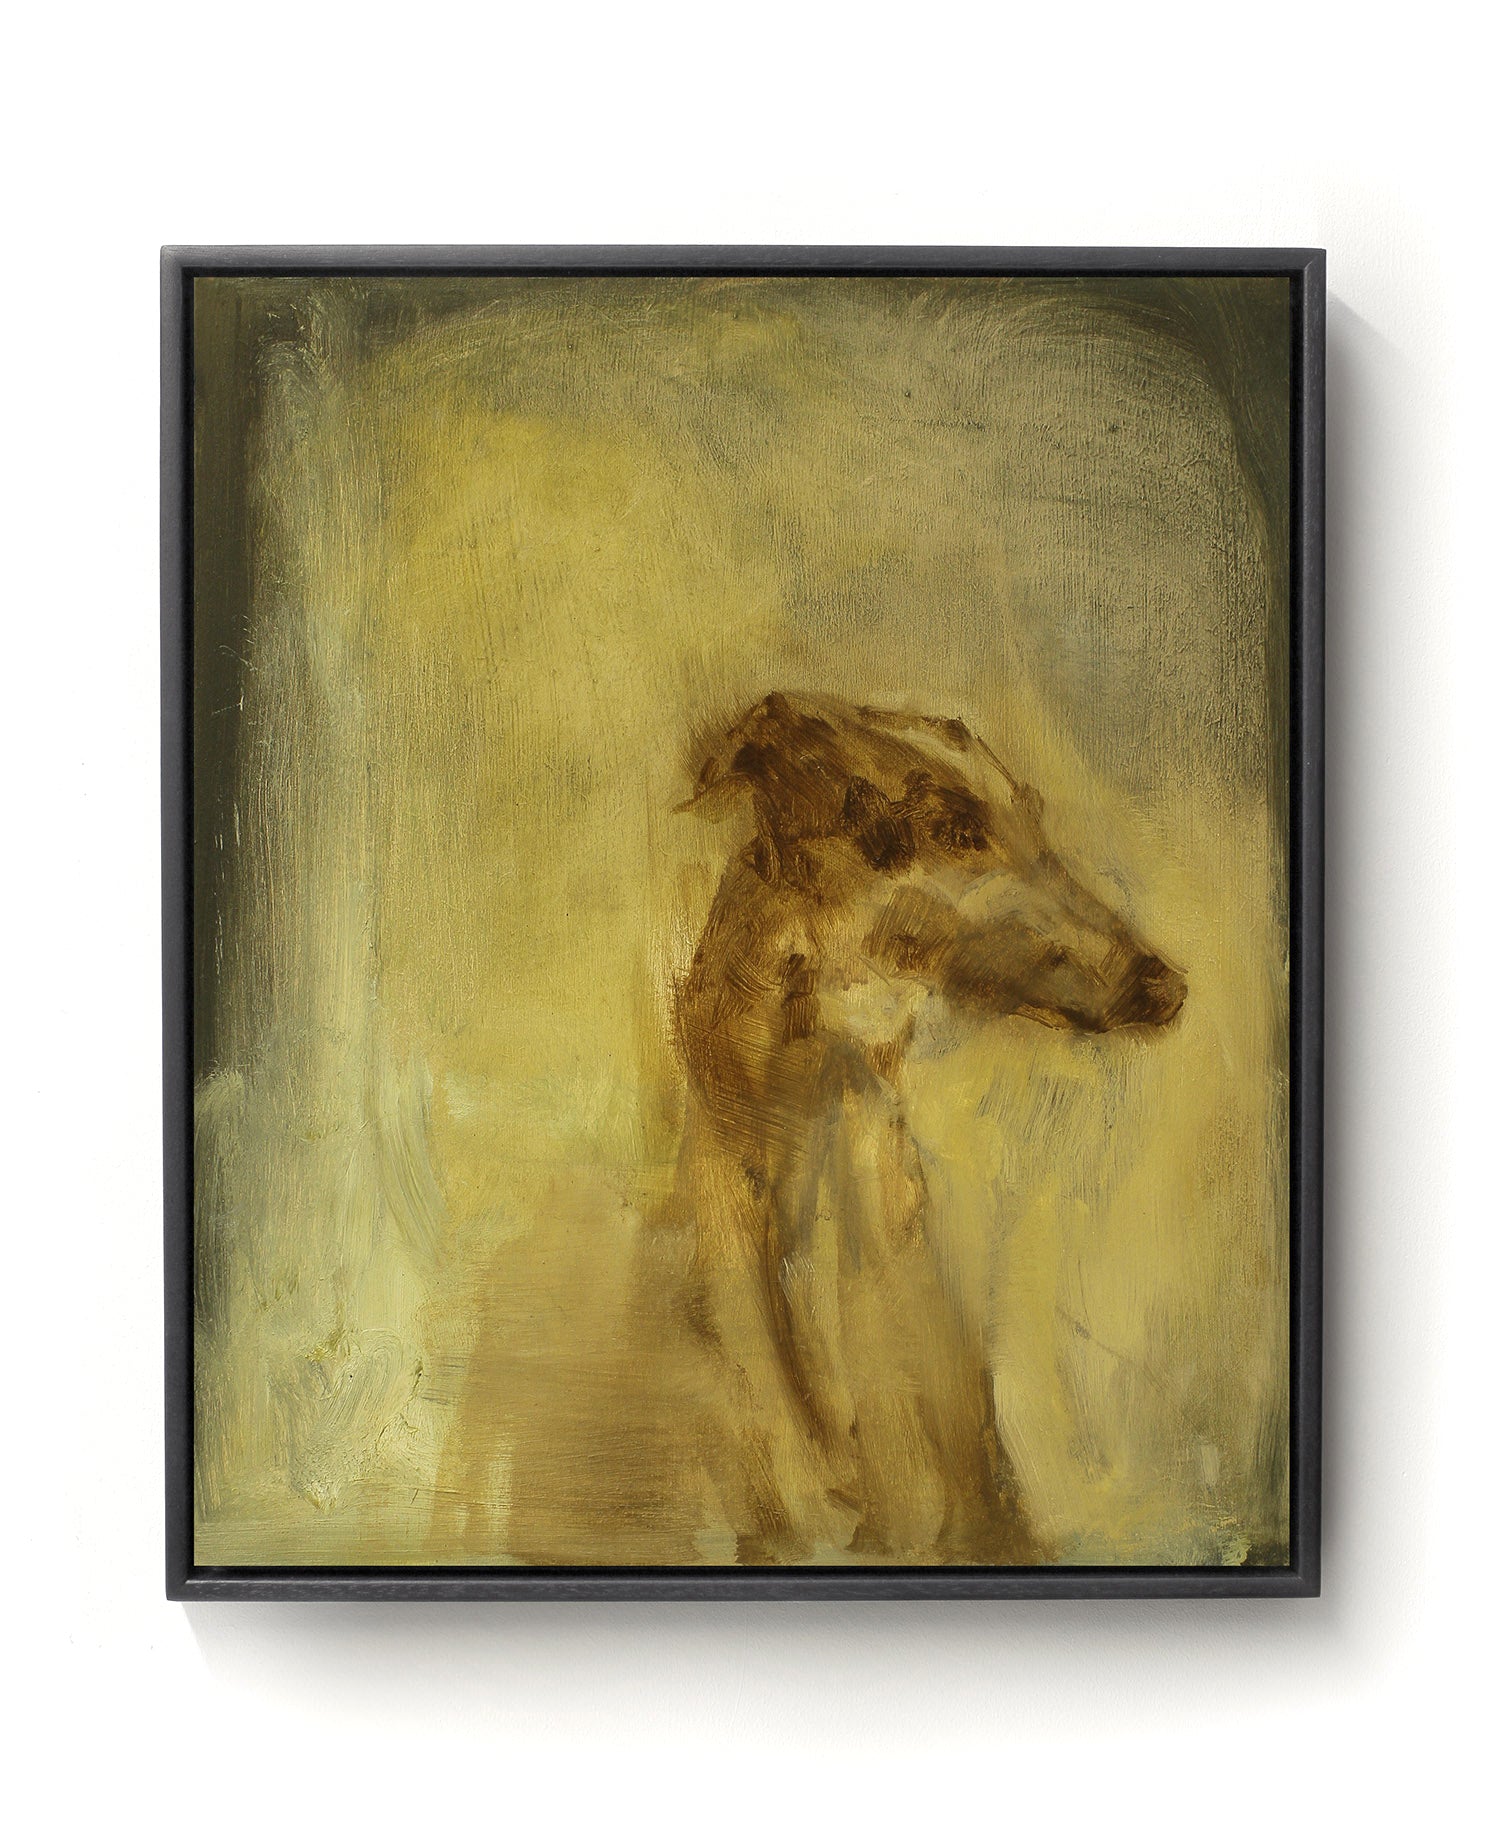 Oil painting on canvas of a dog in brown and gold tones.